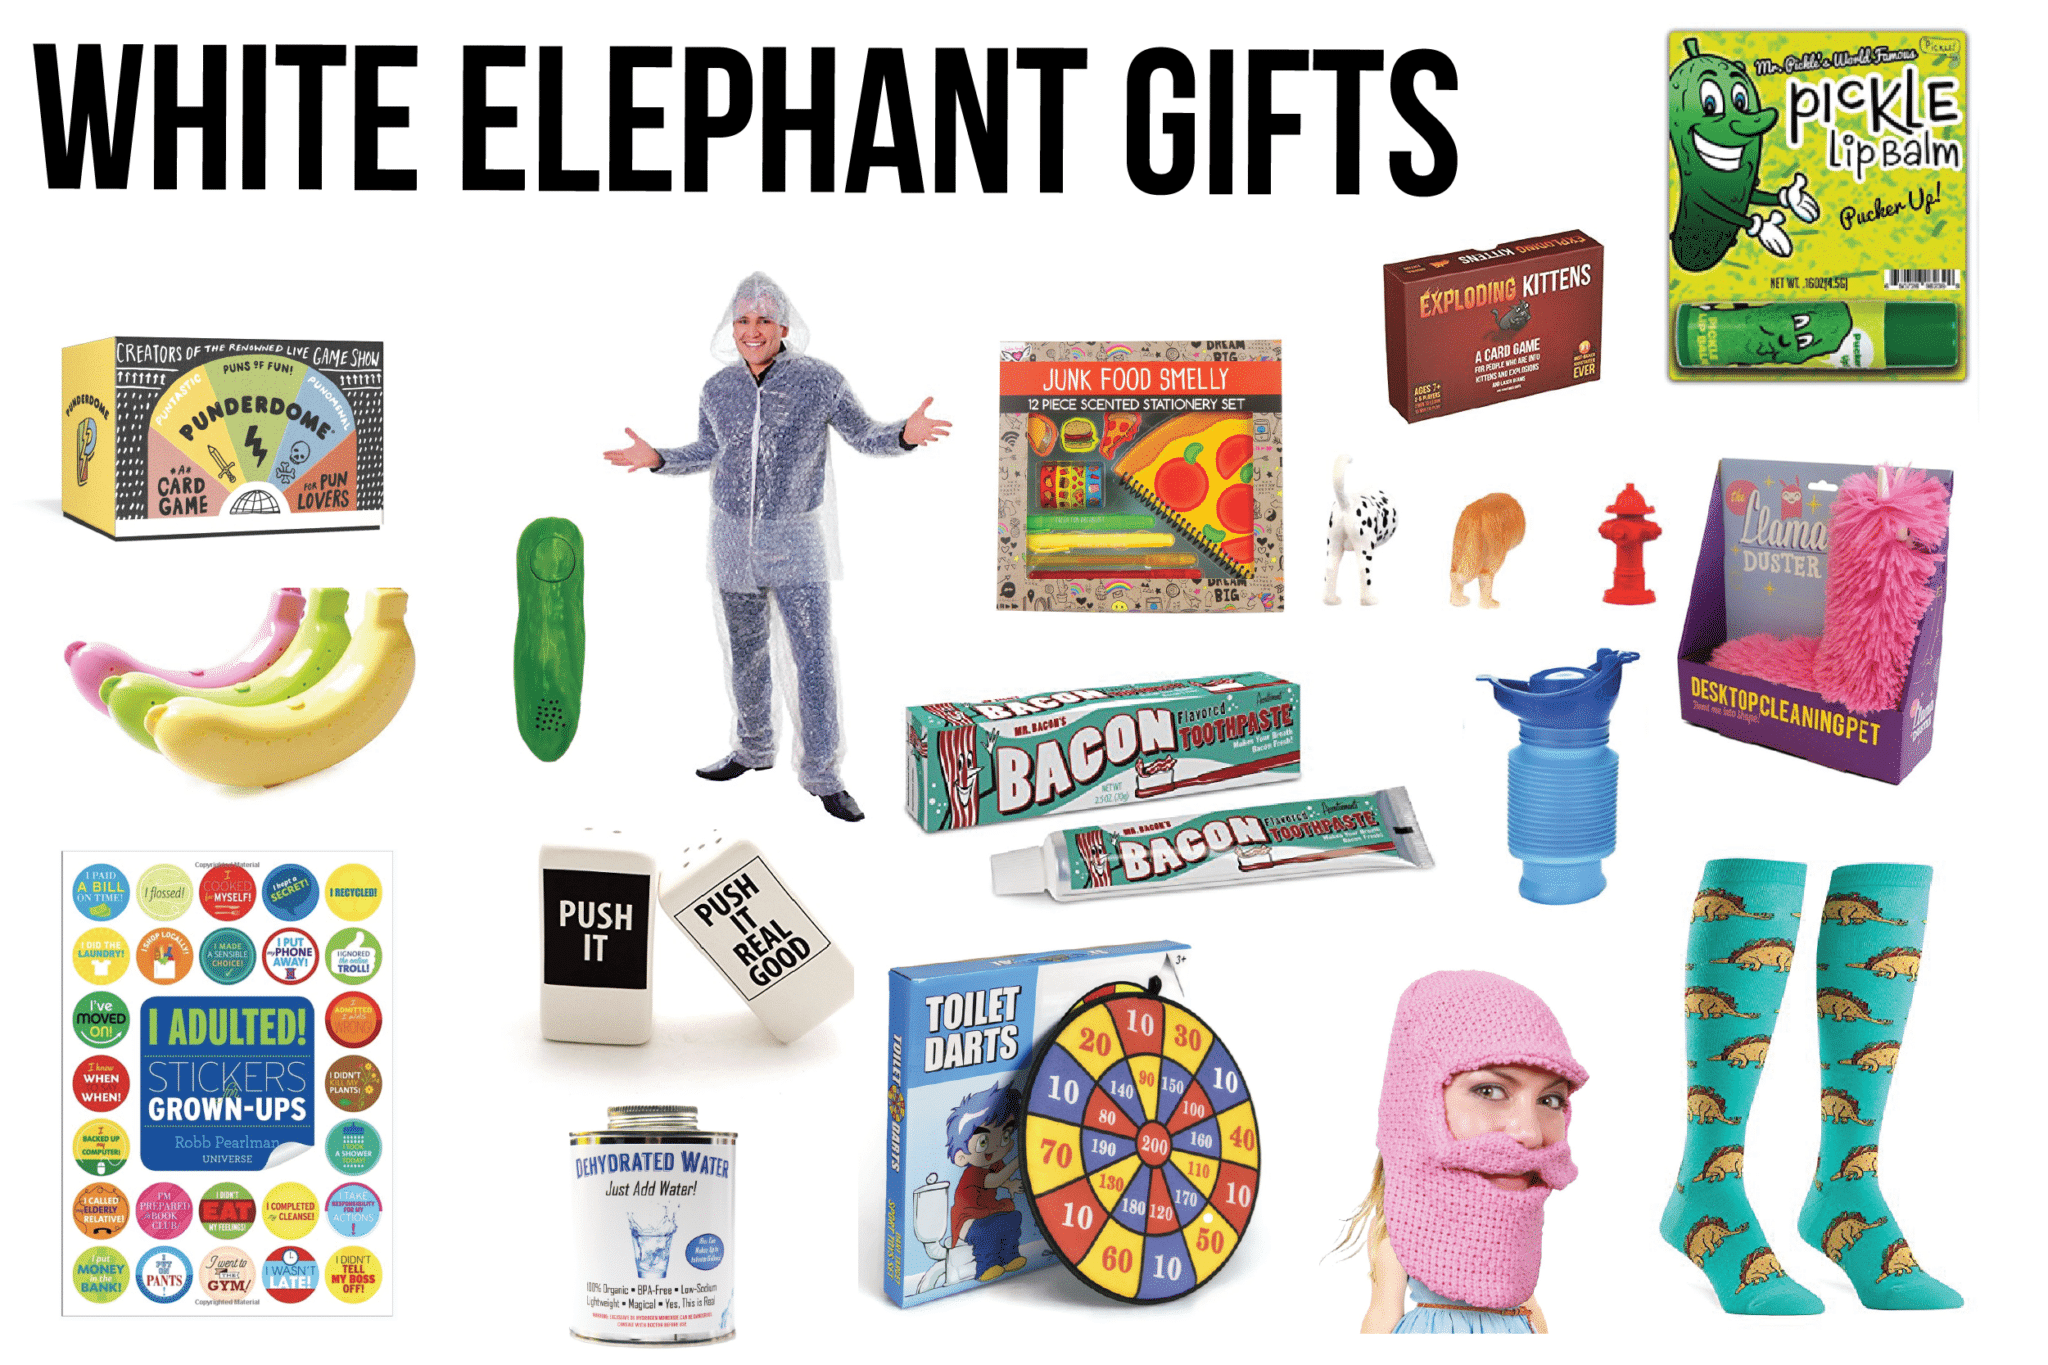 40 On-Sale White Elephant Gift Ideas for Foodies, Starting at $4